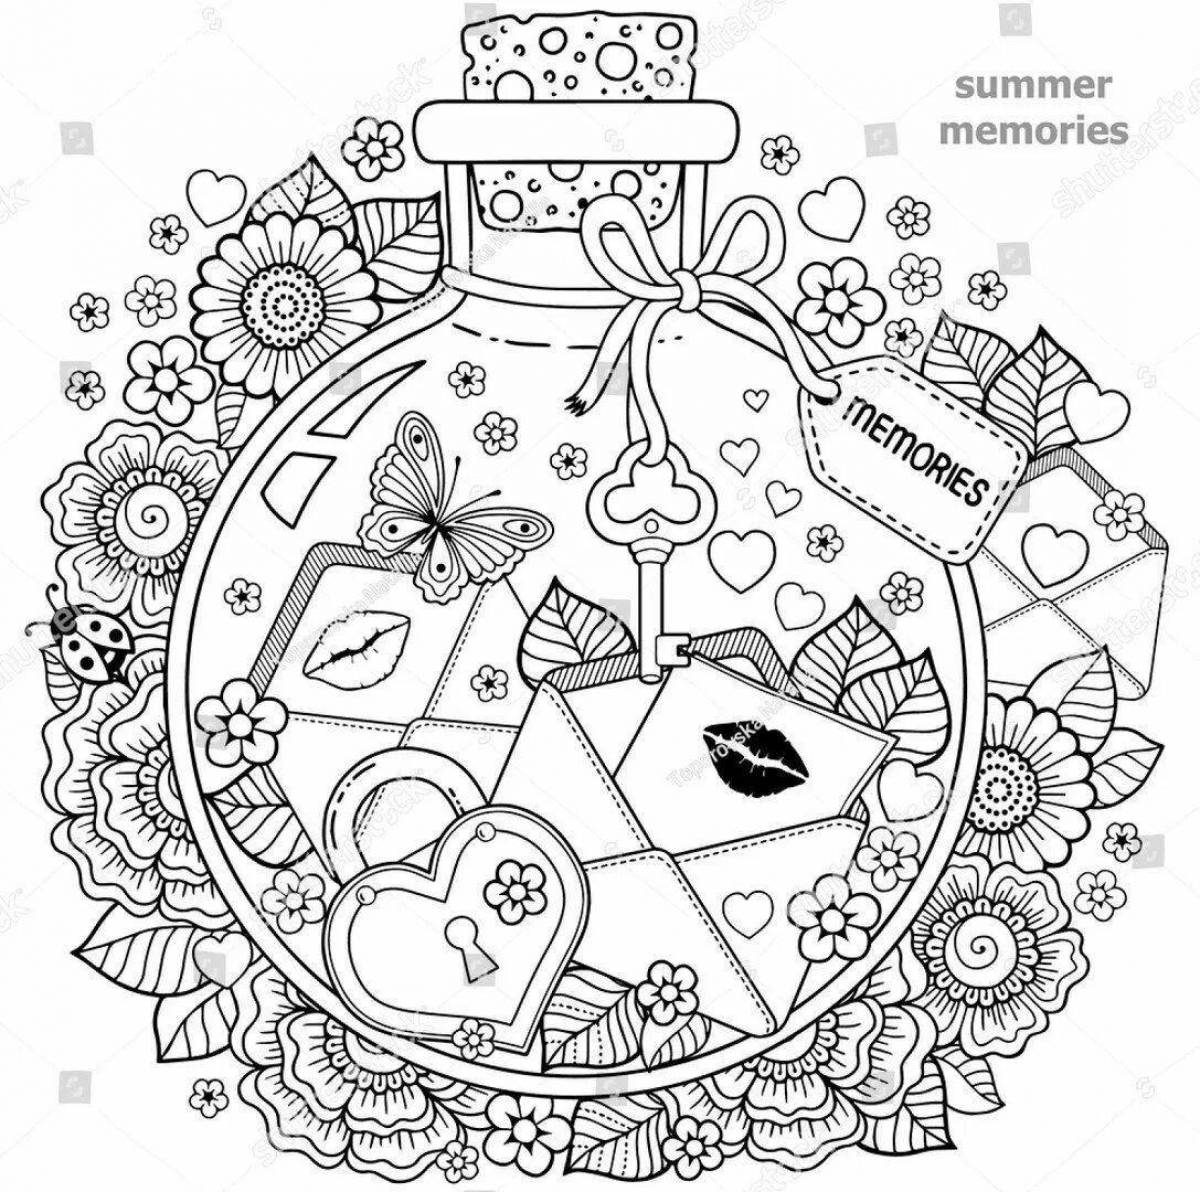 Coloring book funny antistress viruses